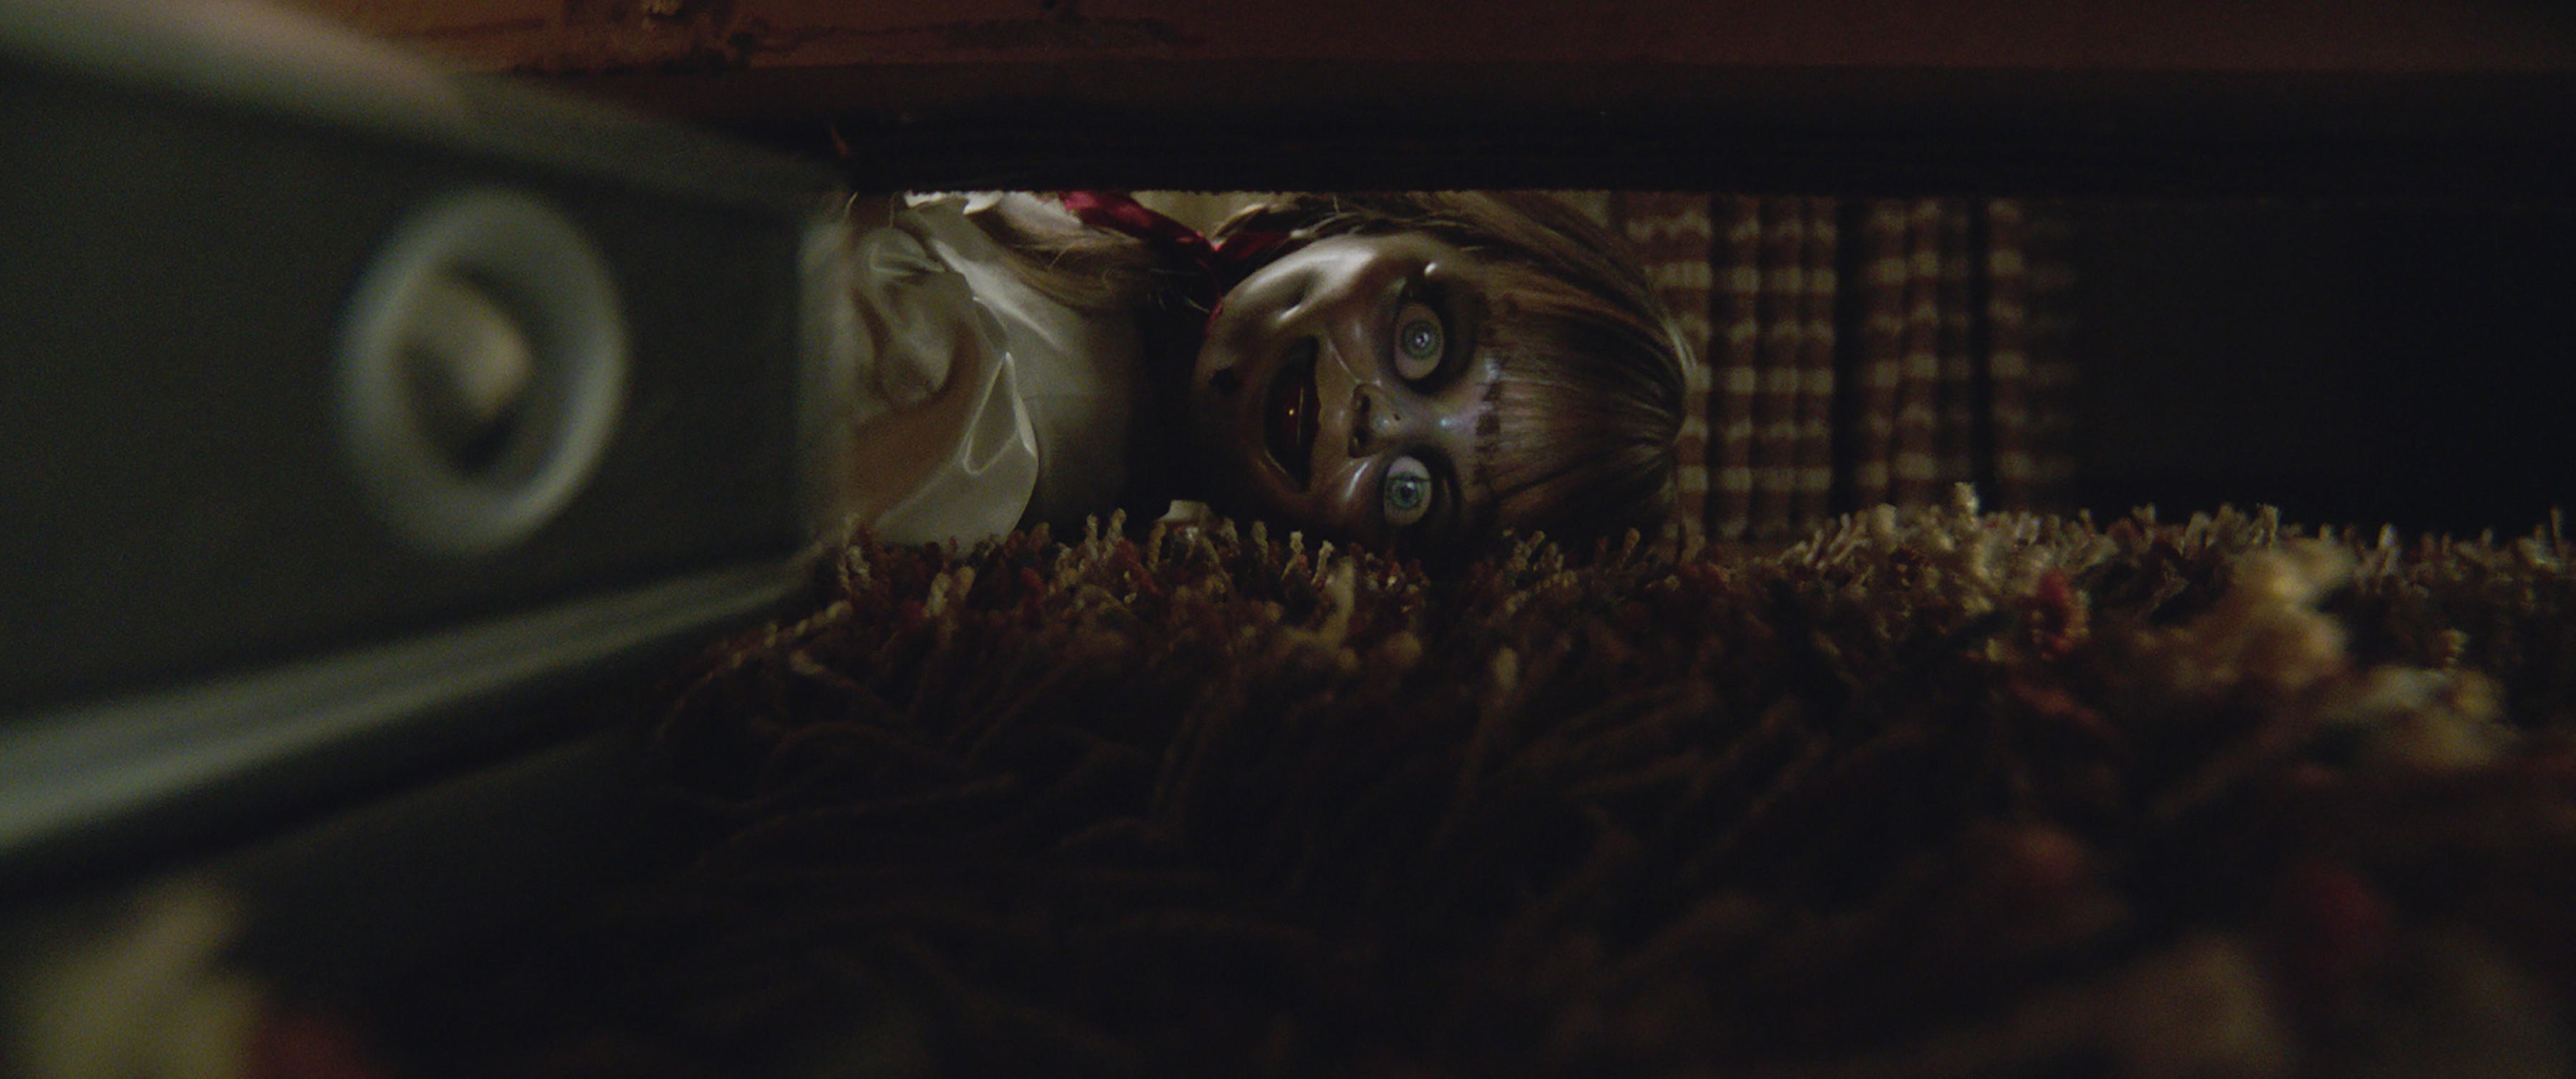 The terrifying &quot;Annabelle&quot; Doll appears under someone&#x27;s bed